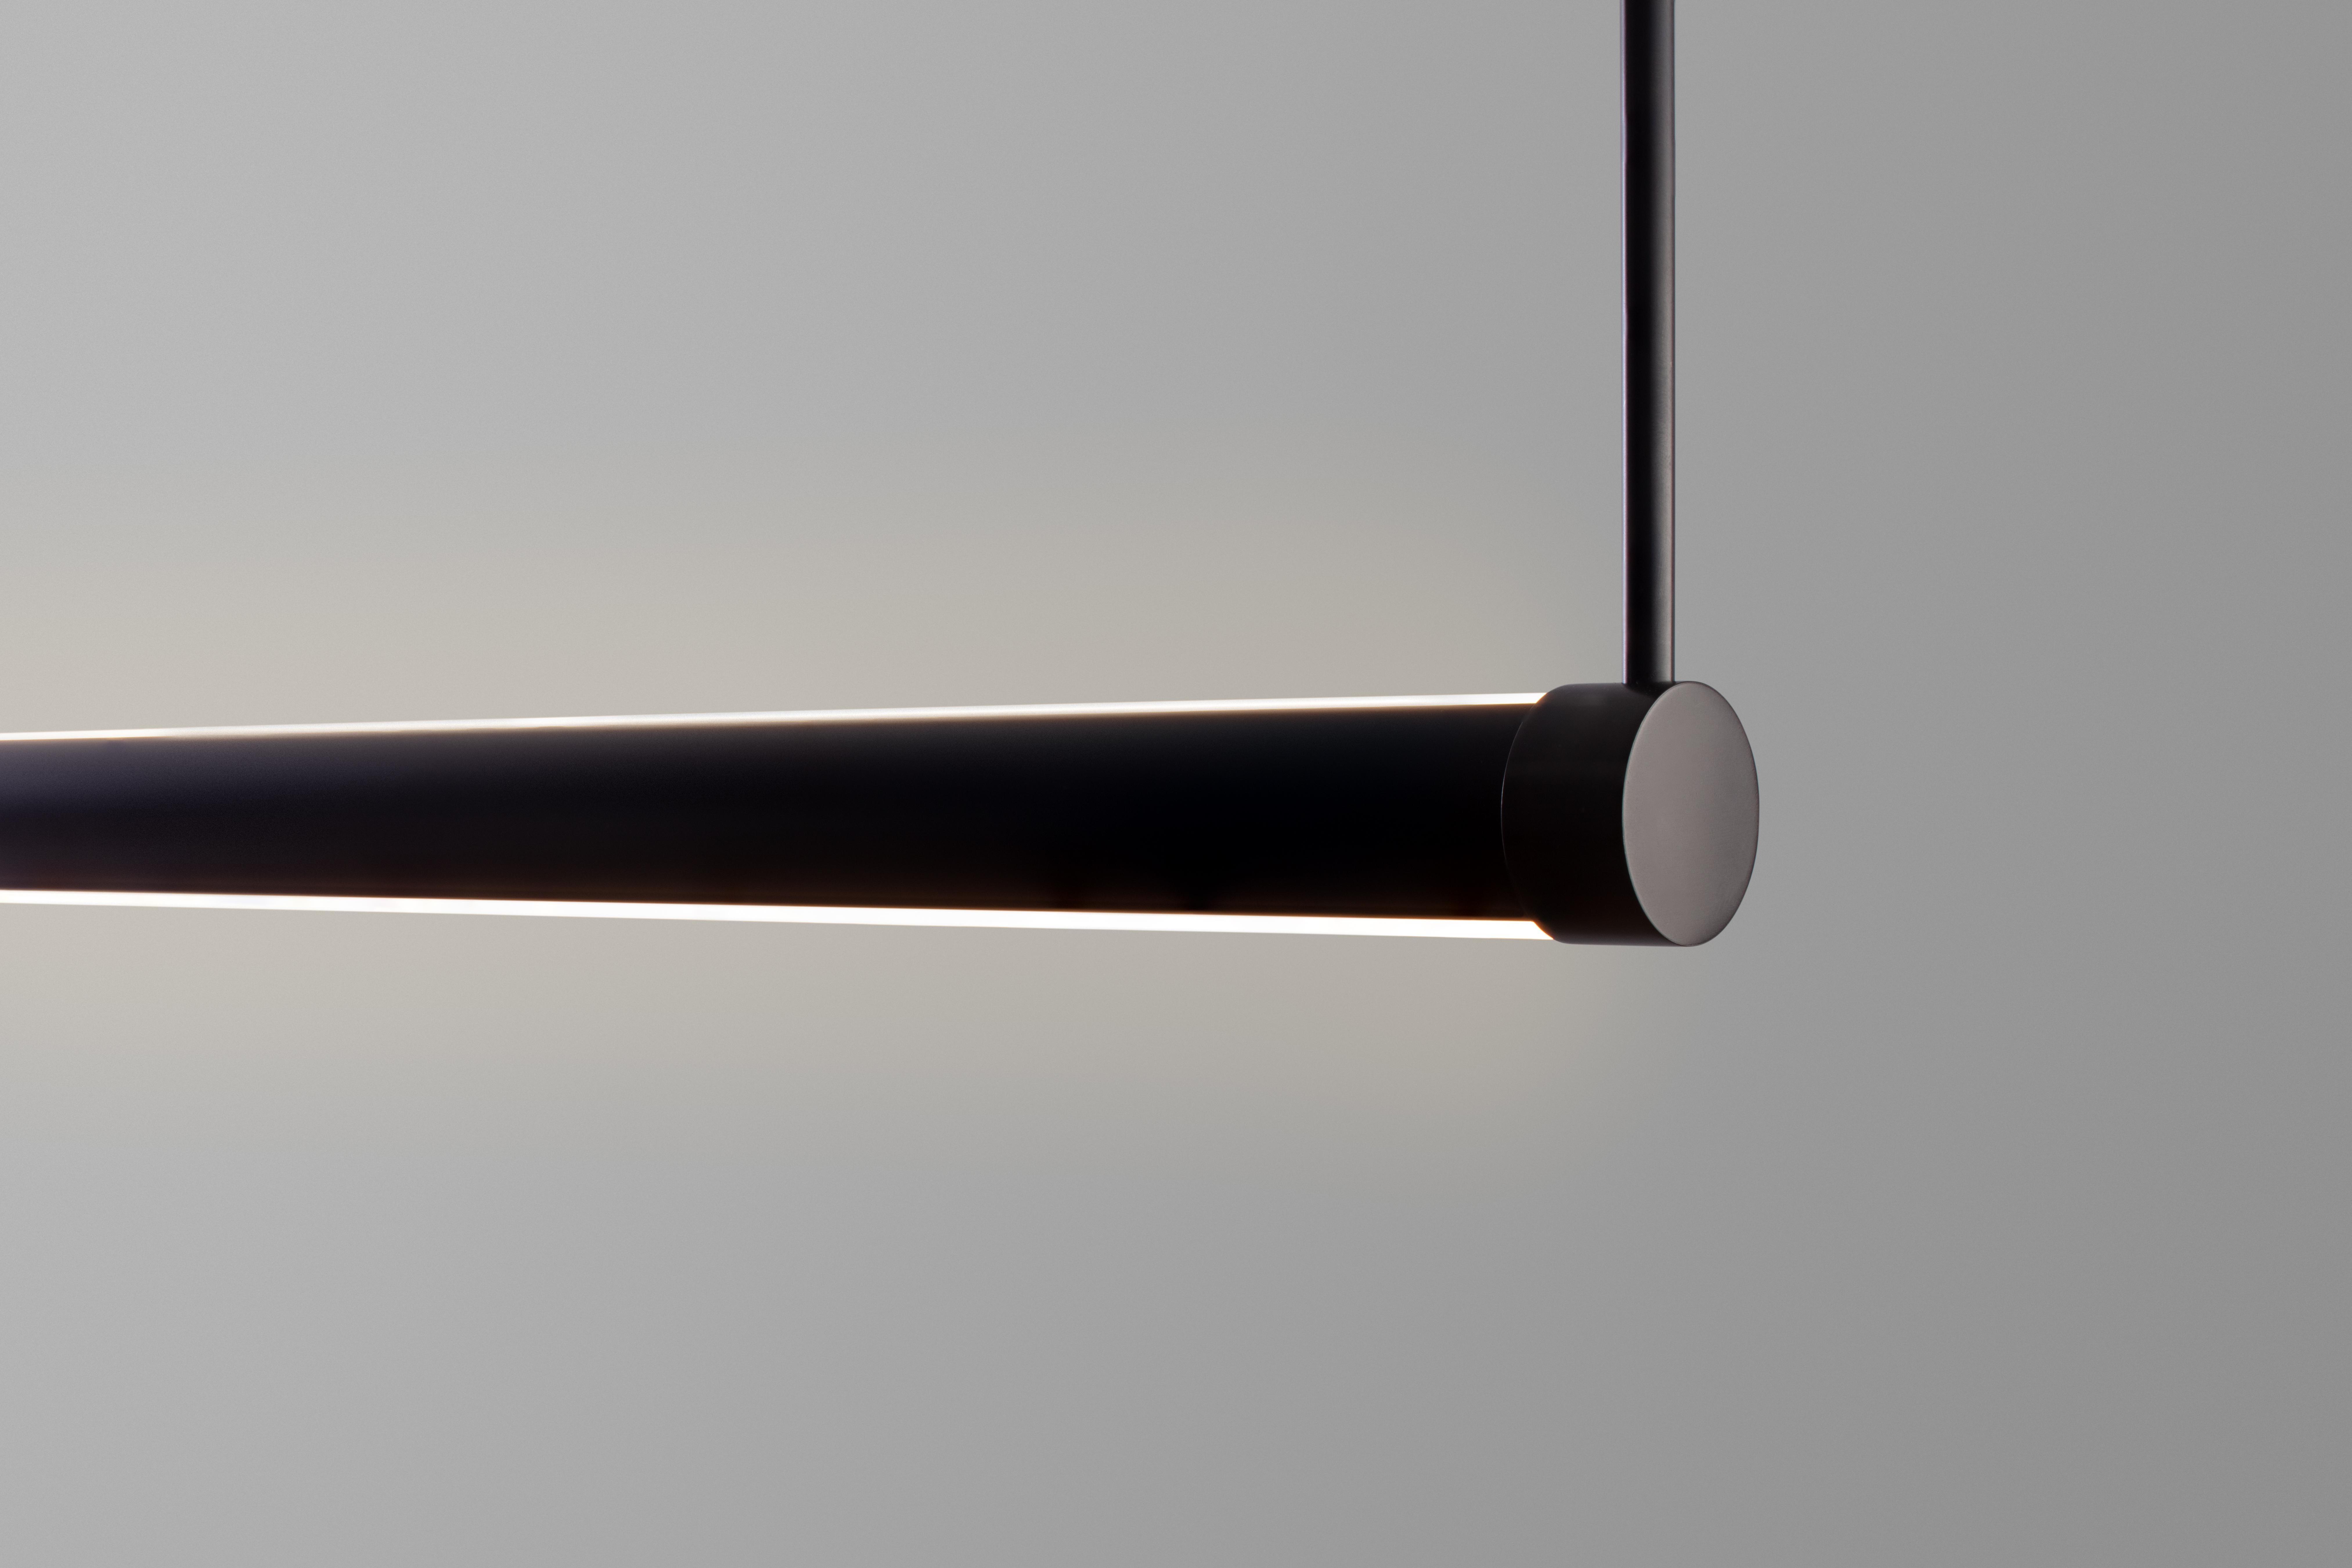 Up & Down Pendelleuchte Contemporary Minimal LED Linear Pendelleuchte mit individueller Patina, UL im Zustand „Neu“ im Angebot in Brooklyn, NY